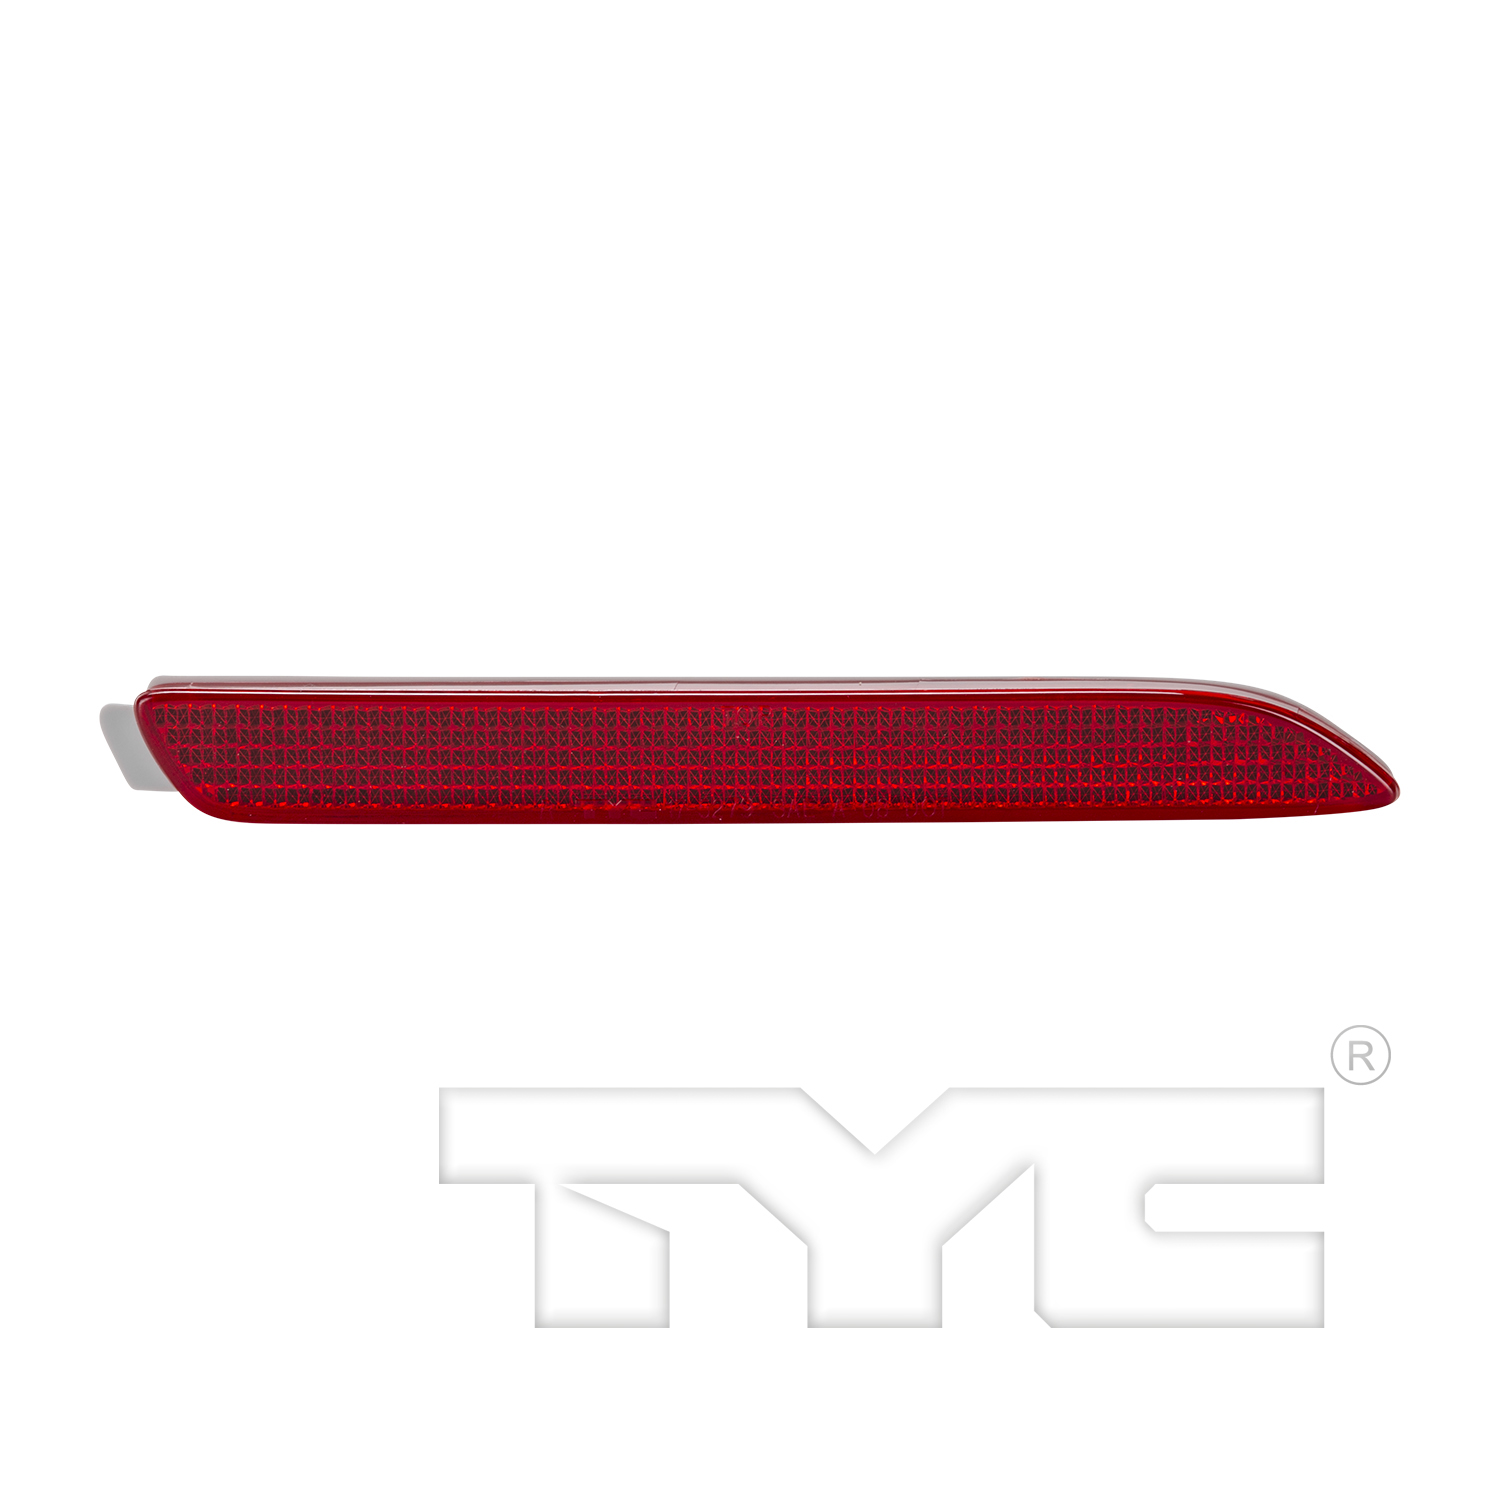 Aftermarket LAMPS for TOYOTA - VENZA, VENZA,09-16,RT Rear reflector